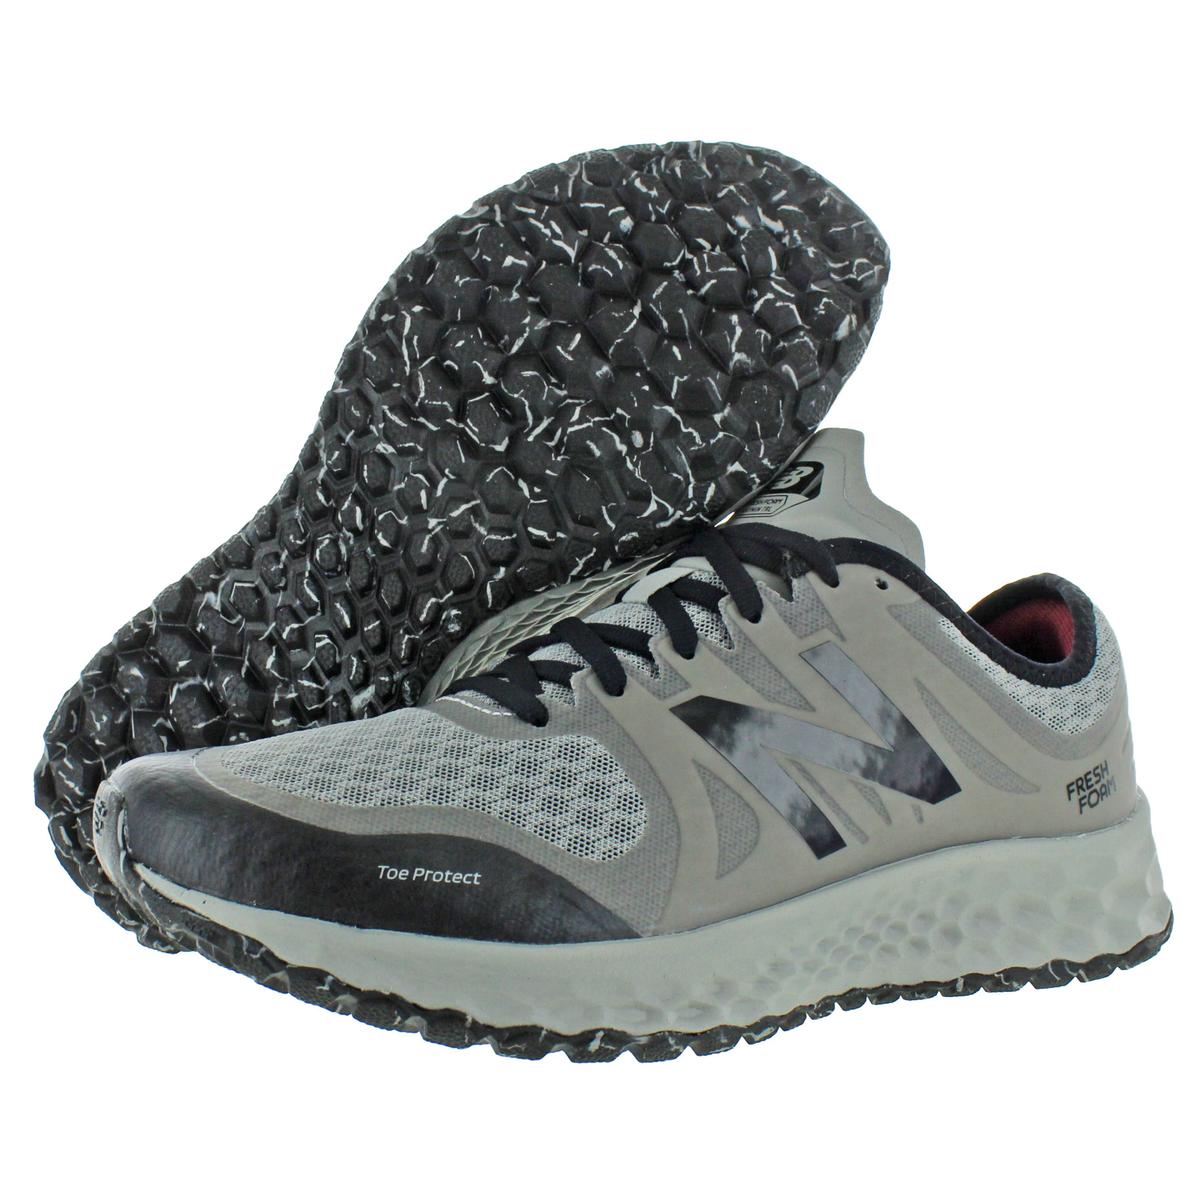 New Balance Mens All Terrain Athletic Trail Running Shoes Sneakers BHFO ...